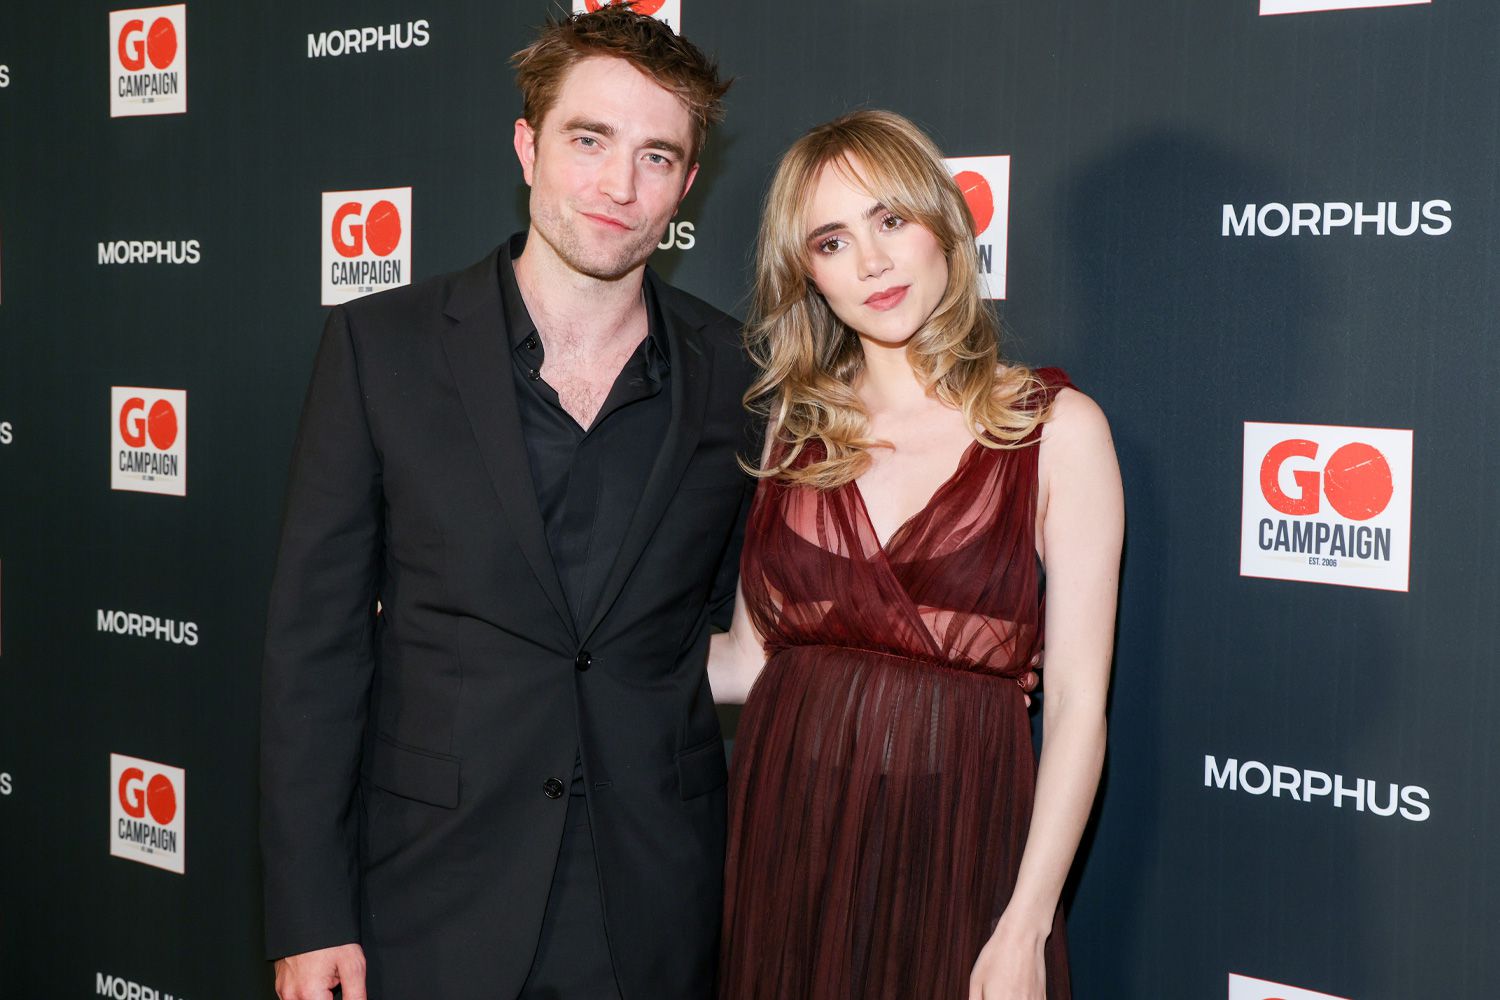 new-celeb-outing-robert-pattinson-and-suki-waterhouse-step-out-after-pregnancy-news-with-taylor-swift-in-tow